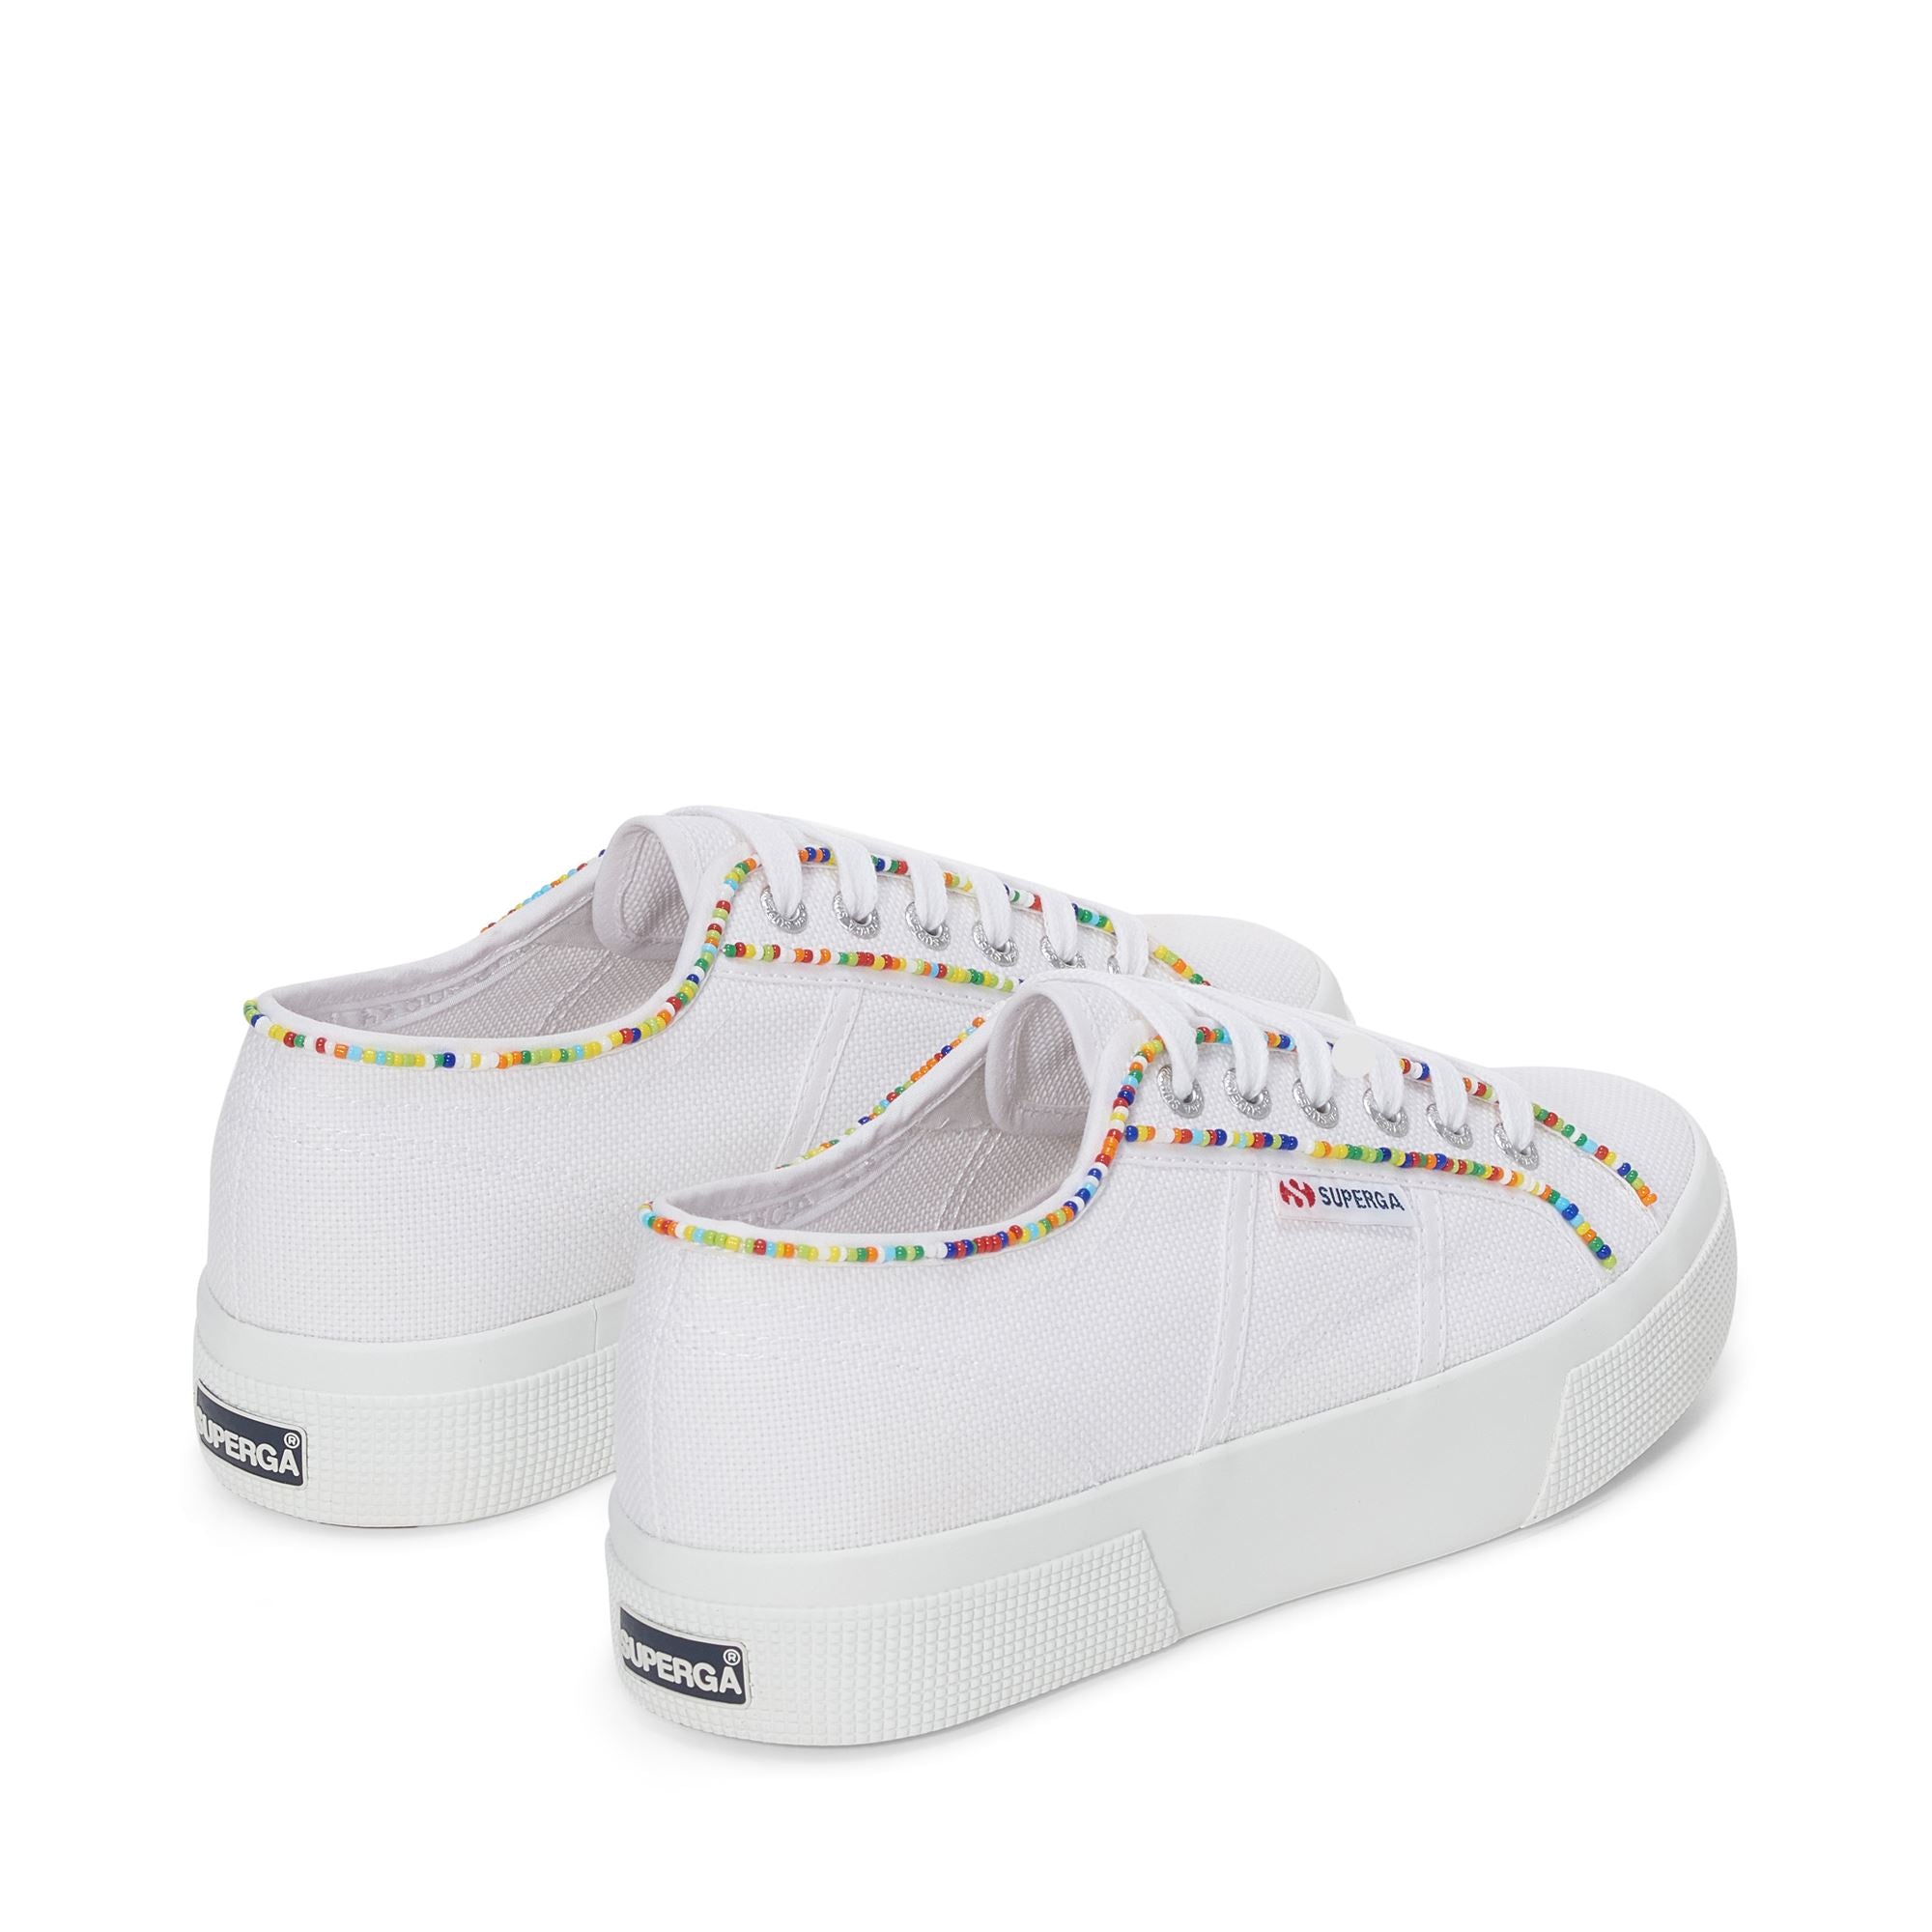 2740 MULTICOLOR BEADS - Lady Shoes - Wedge - Woman - WHITE-MULTICOLOR BEADS